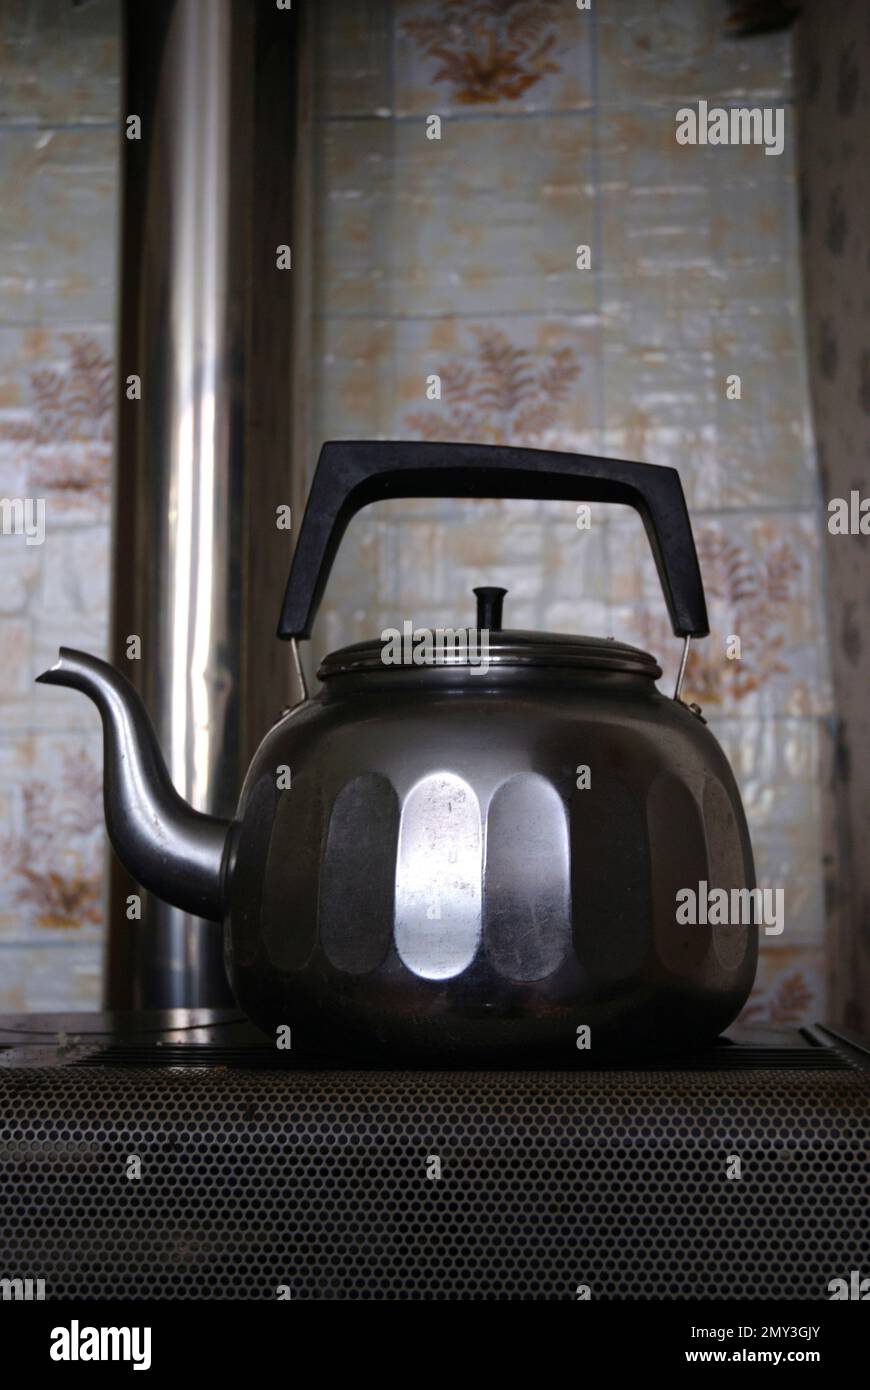 old kettle on an old gas stove Stock Photo